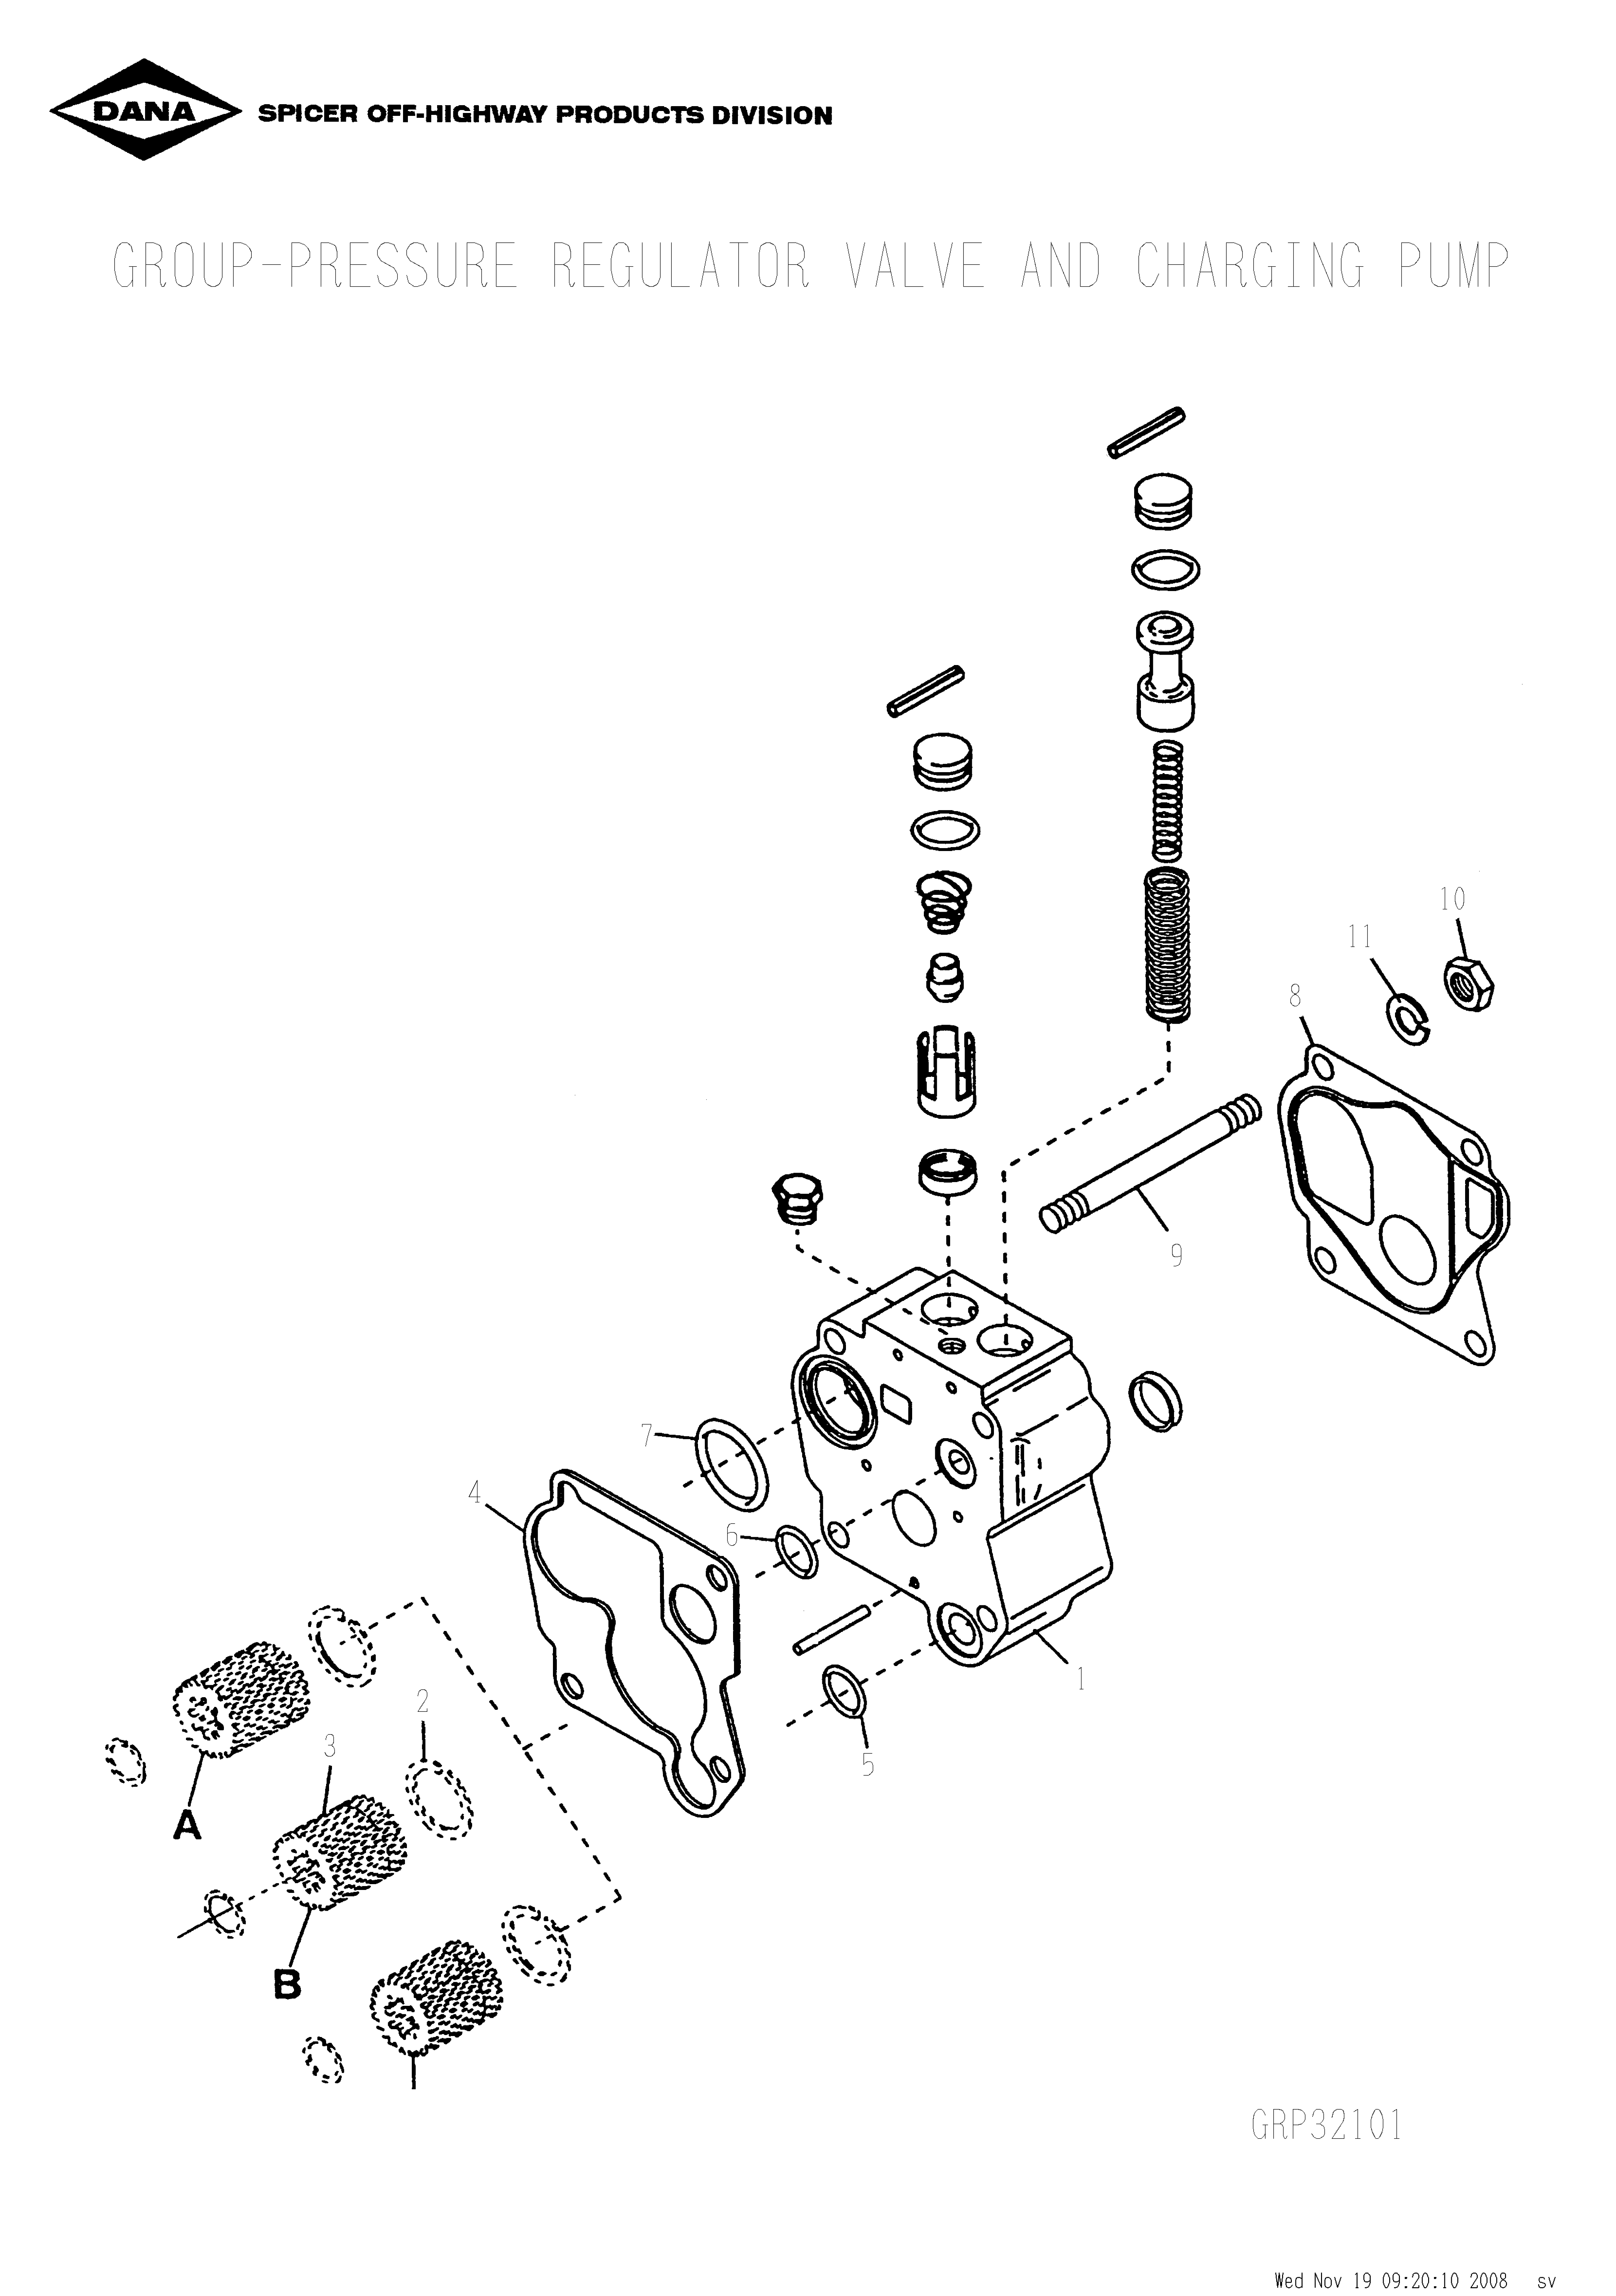 drawing for OLDENBURG LAKESHORE UV401734 - ASSY-CHARGE PUMP & COVER (33000-28 GPM AT 2000 RPM) (figure 1)